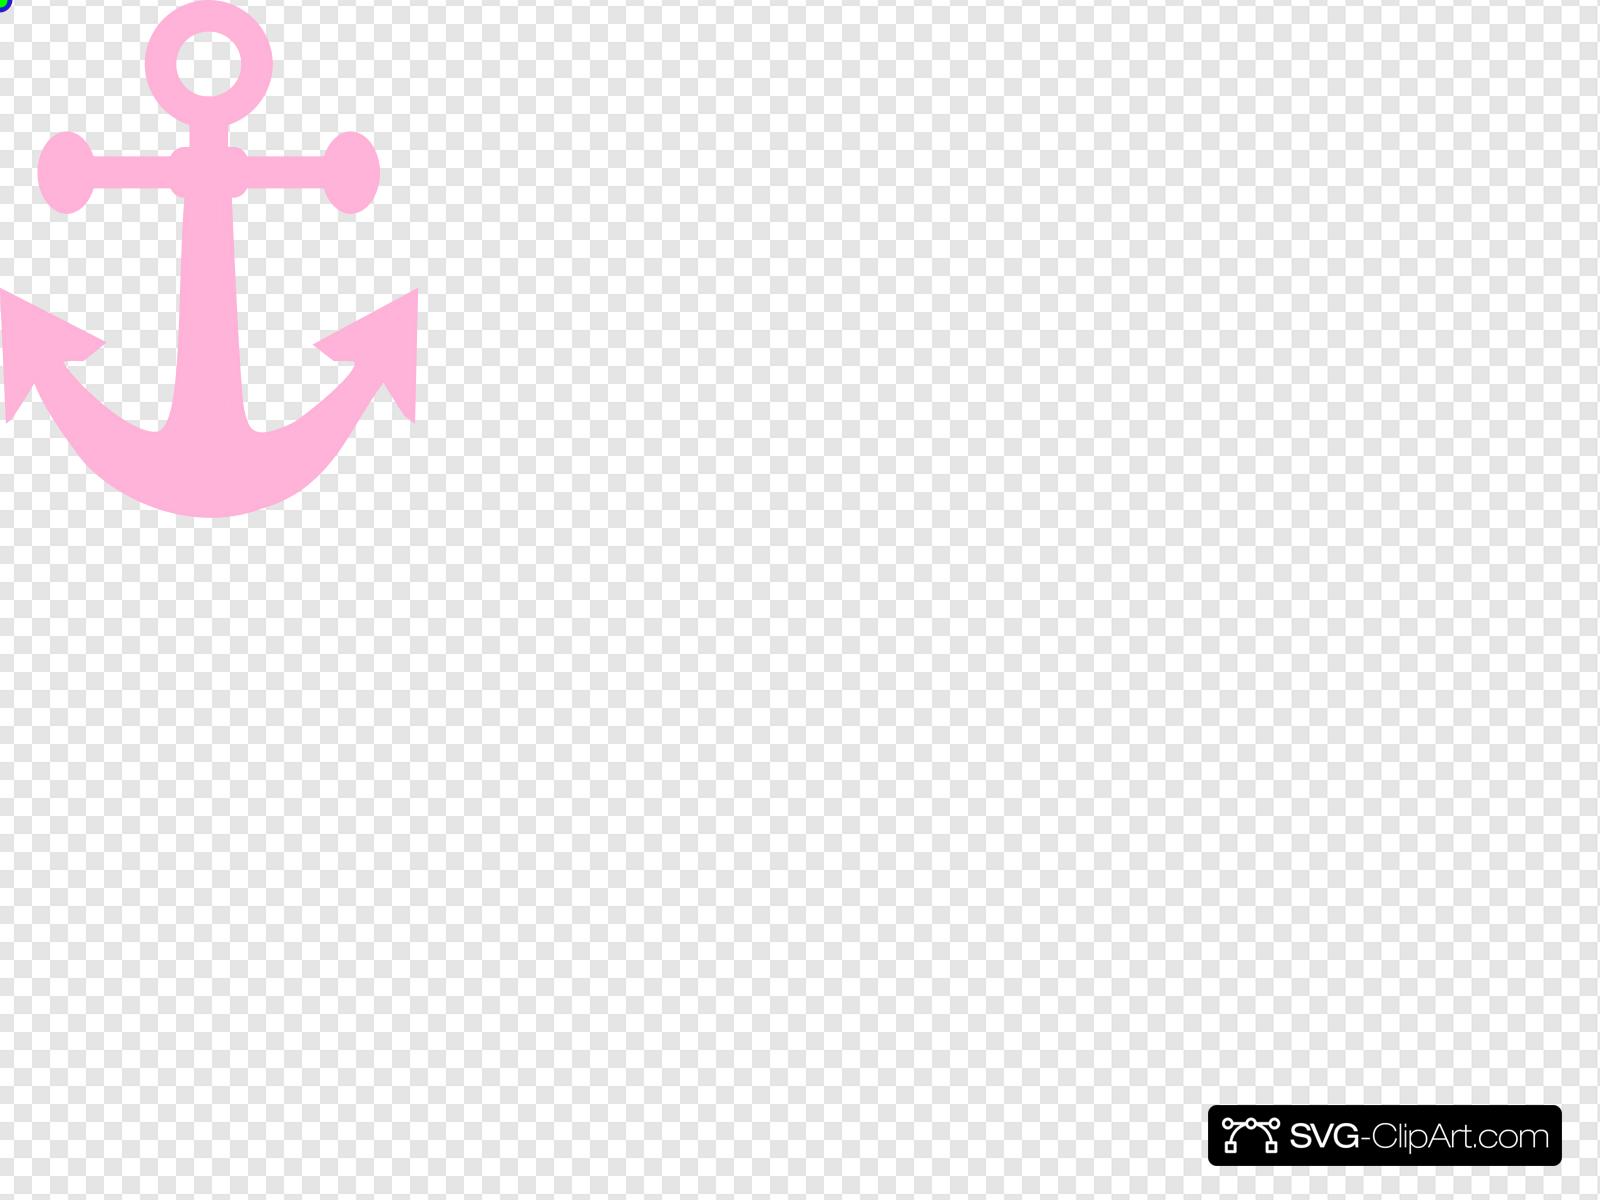 Light Pink Anchor Clip art, Icon and SVG